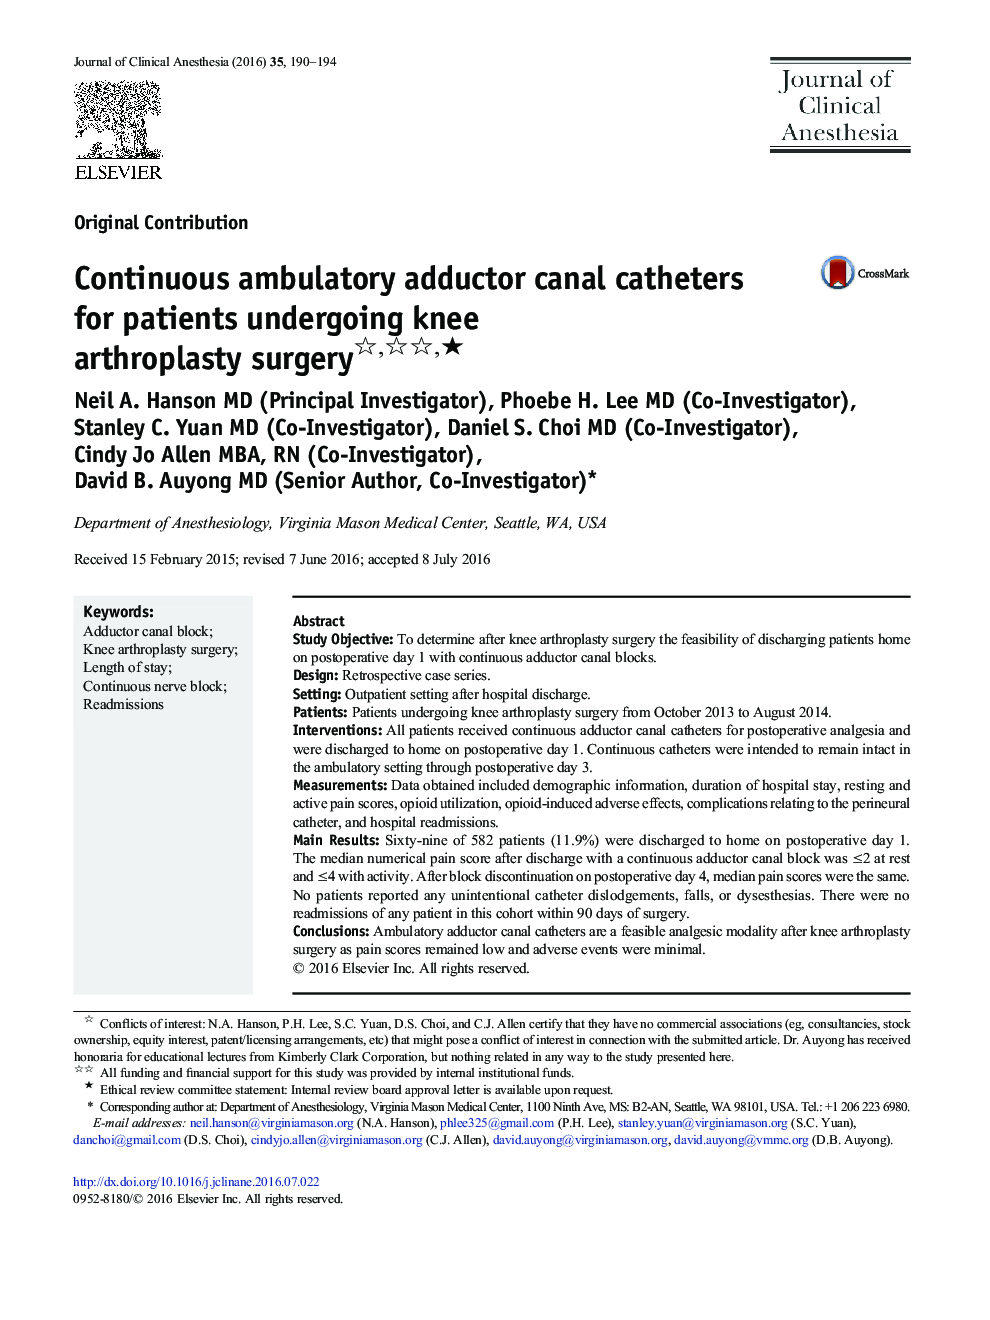 Continuous ambulatory adductor canal catheters for patients undergoing knee arthroplasty surgery